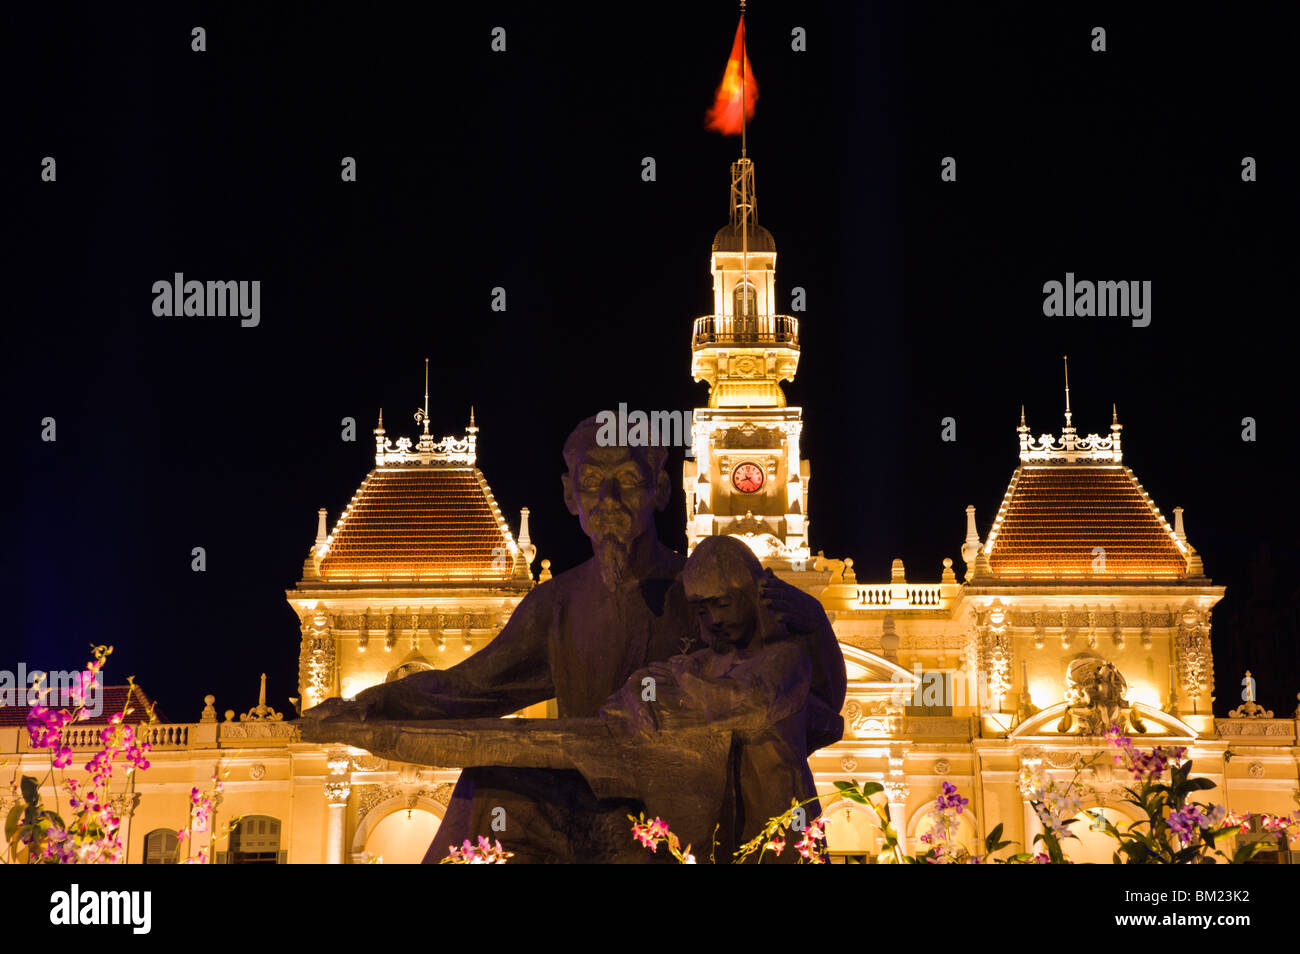 Nightshot of Ho Chi Minh statue in front of Hotel de Ville in central Ho Chi Minh City Stock Photo